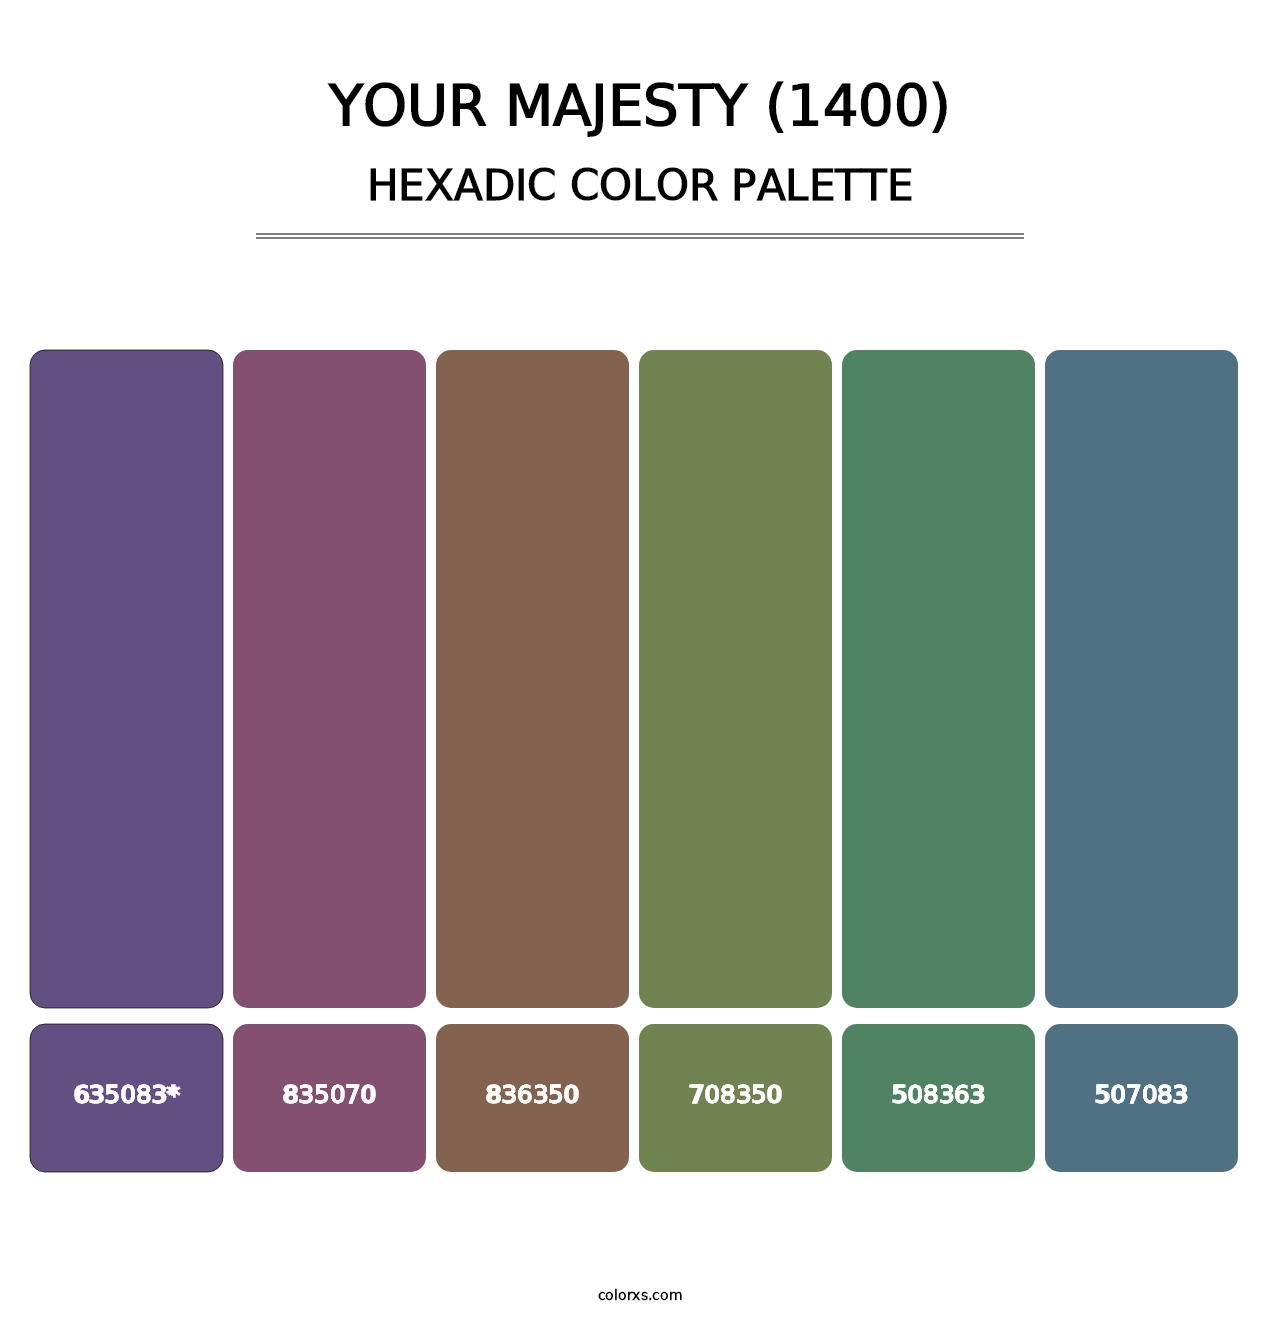 Your Majesty (1400) - Hexadic Color Palette